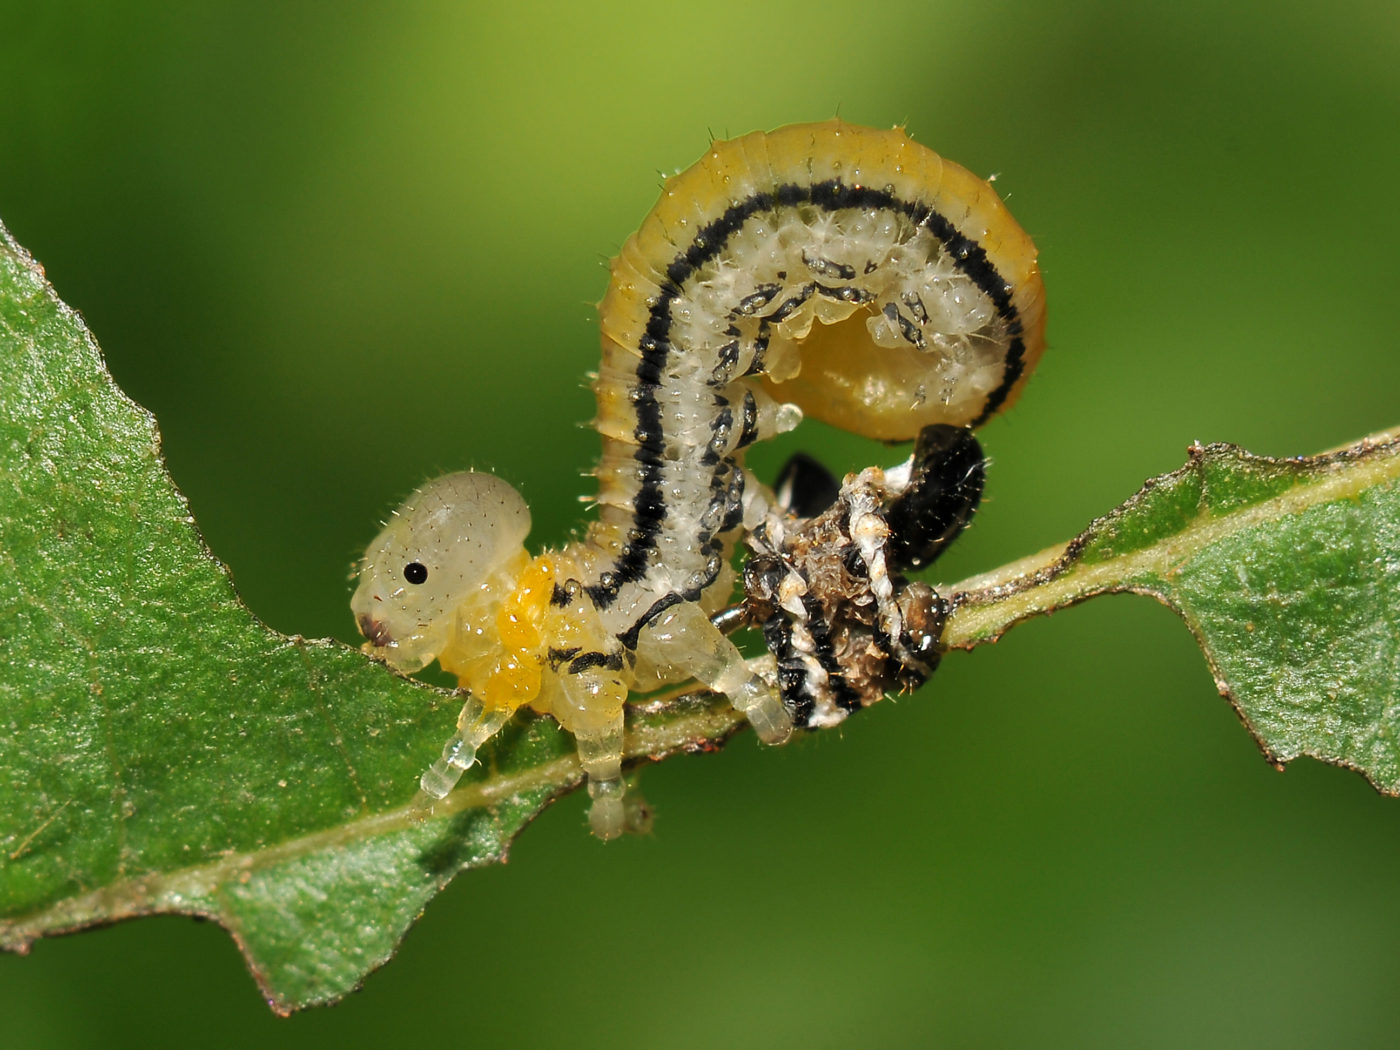 This sawfly larva first caught Beverley Brouwer’s eye because it didn’t have the black head that she had previously seen in other sawfly larvae. Looking closer, she saw that this was because it had just shed its old skin, which was wrapped neatly around